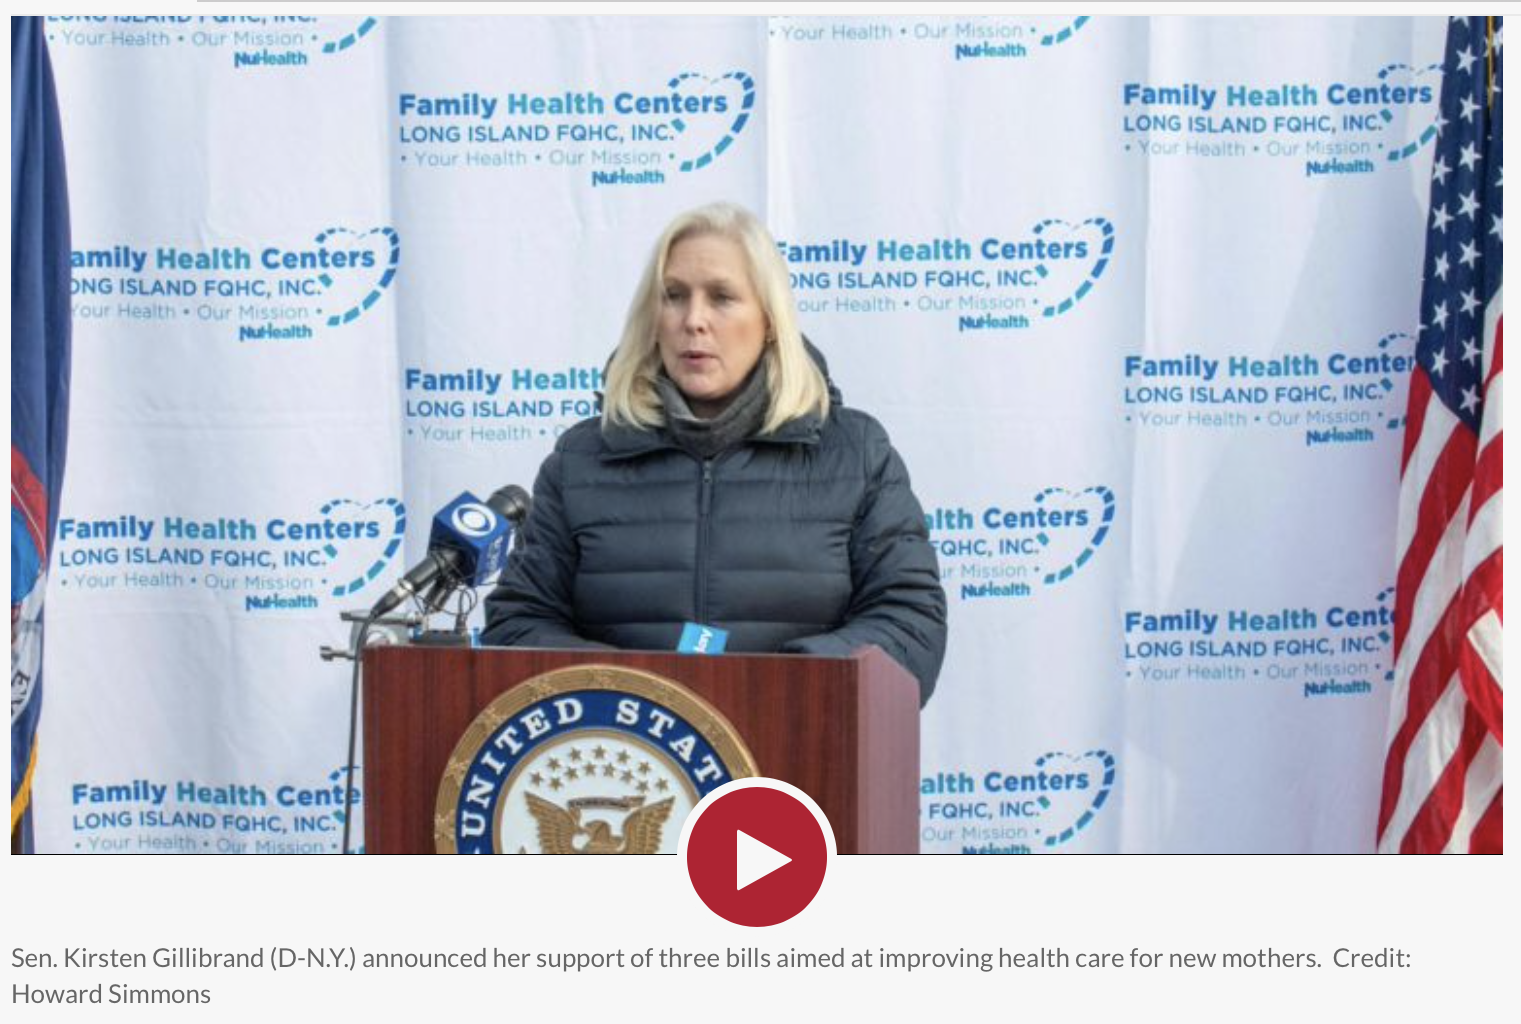 Gillibrand Seeks Funds to Reduce Deaths among Pregnant Women